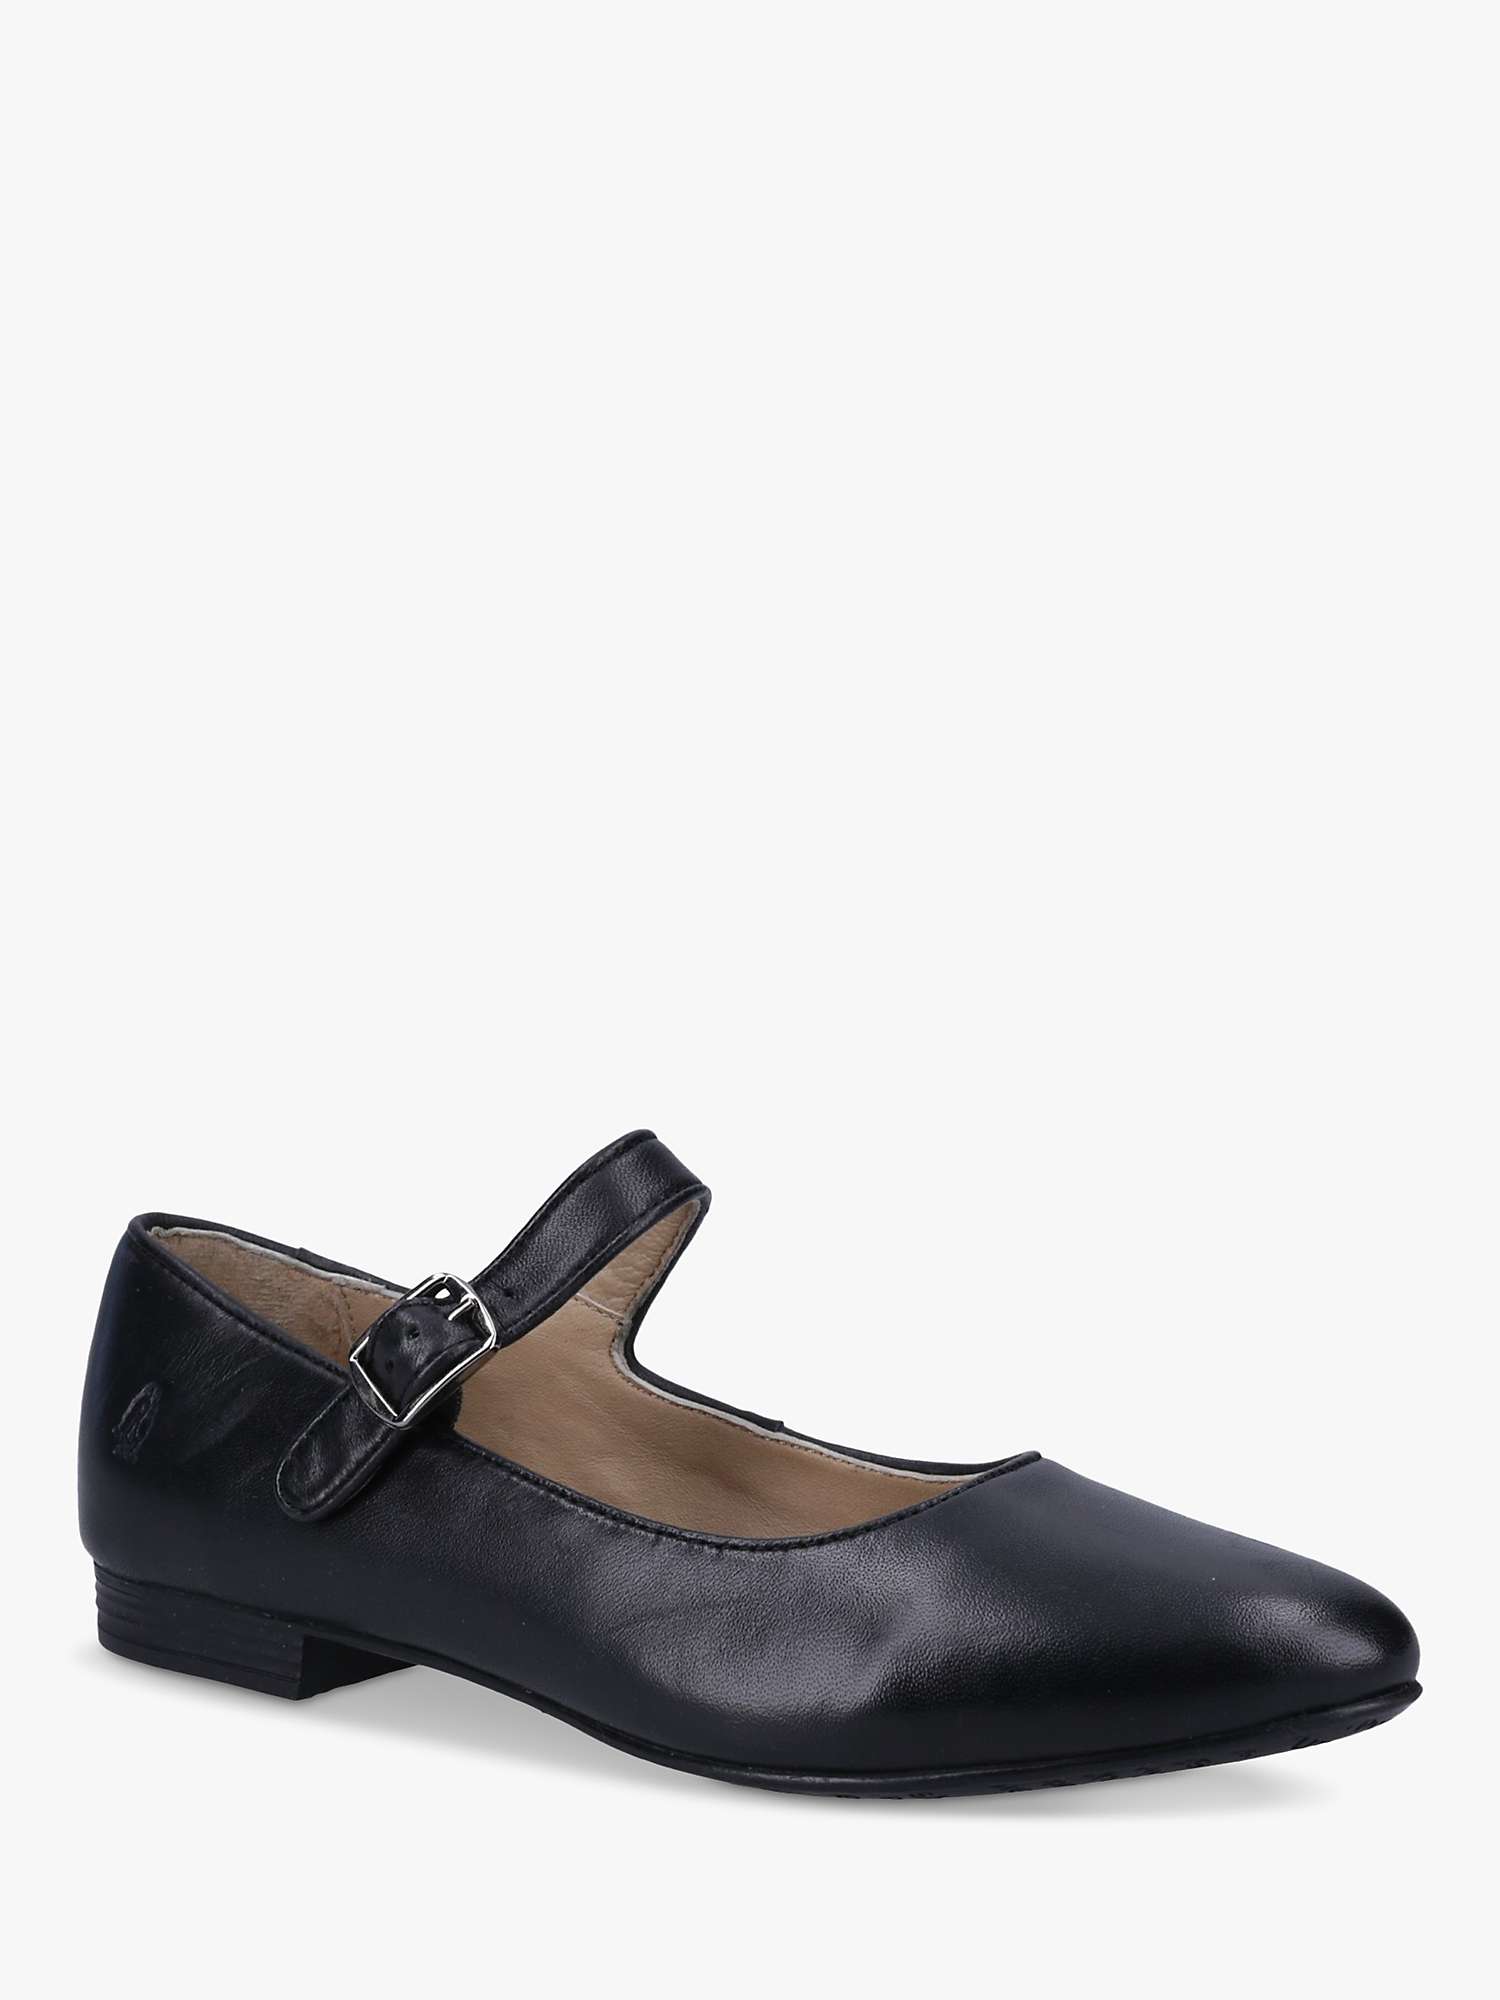 Buy Hush Puppies Melissa Leather Strap Mary Jane Shoes, Black Online at johnlewis.com